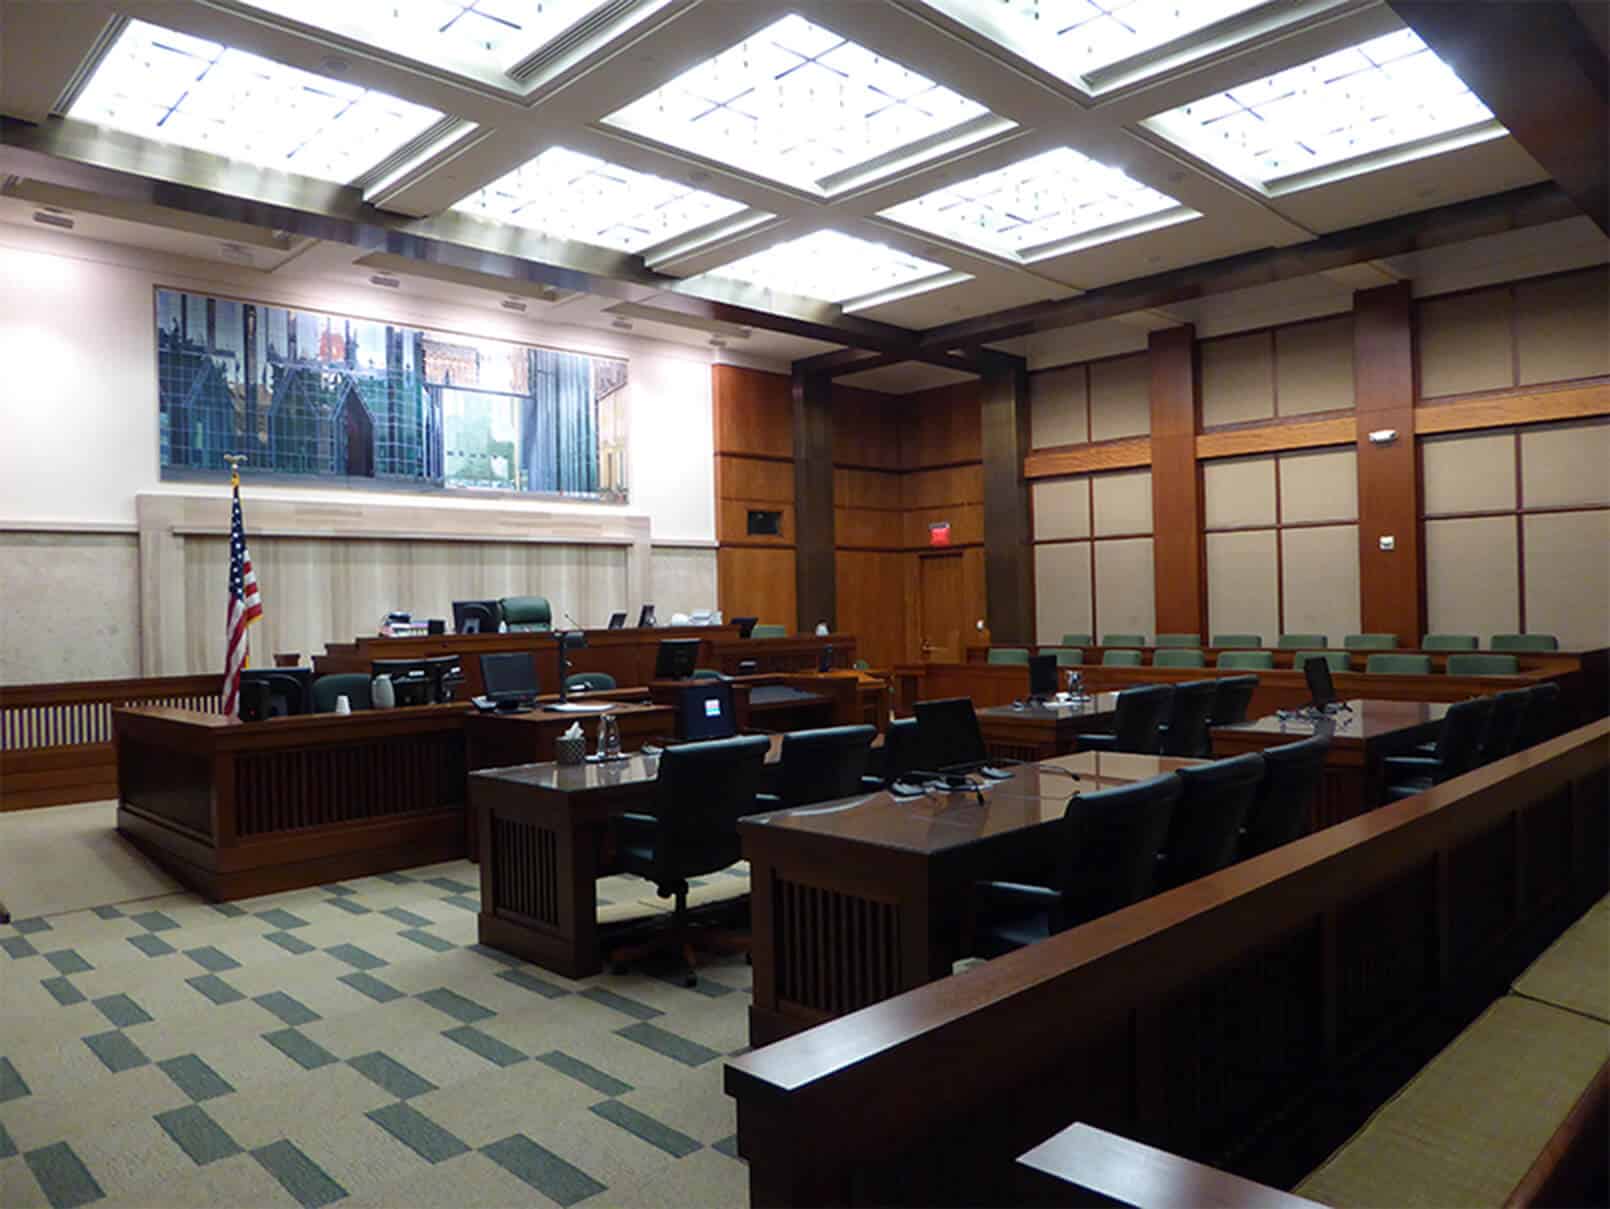 PAWDC Courtroom 2